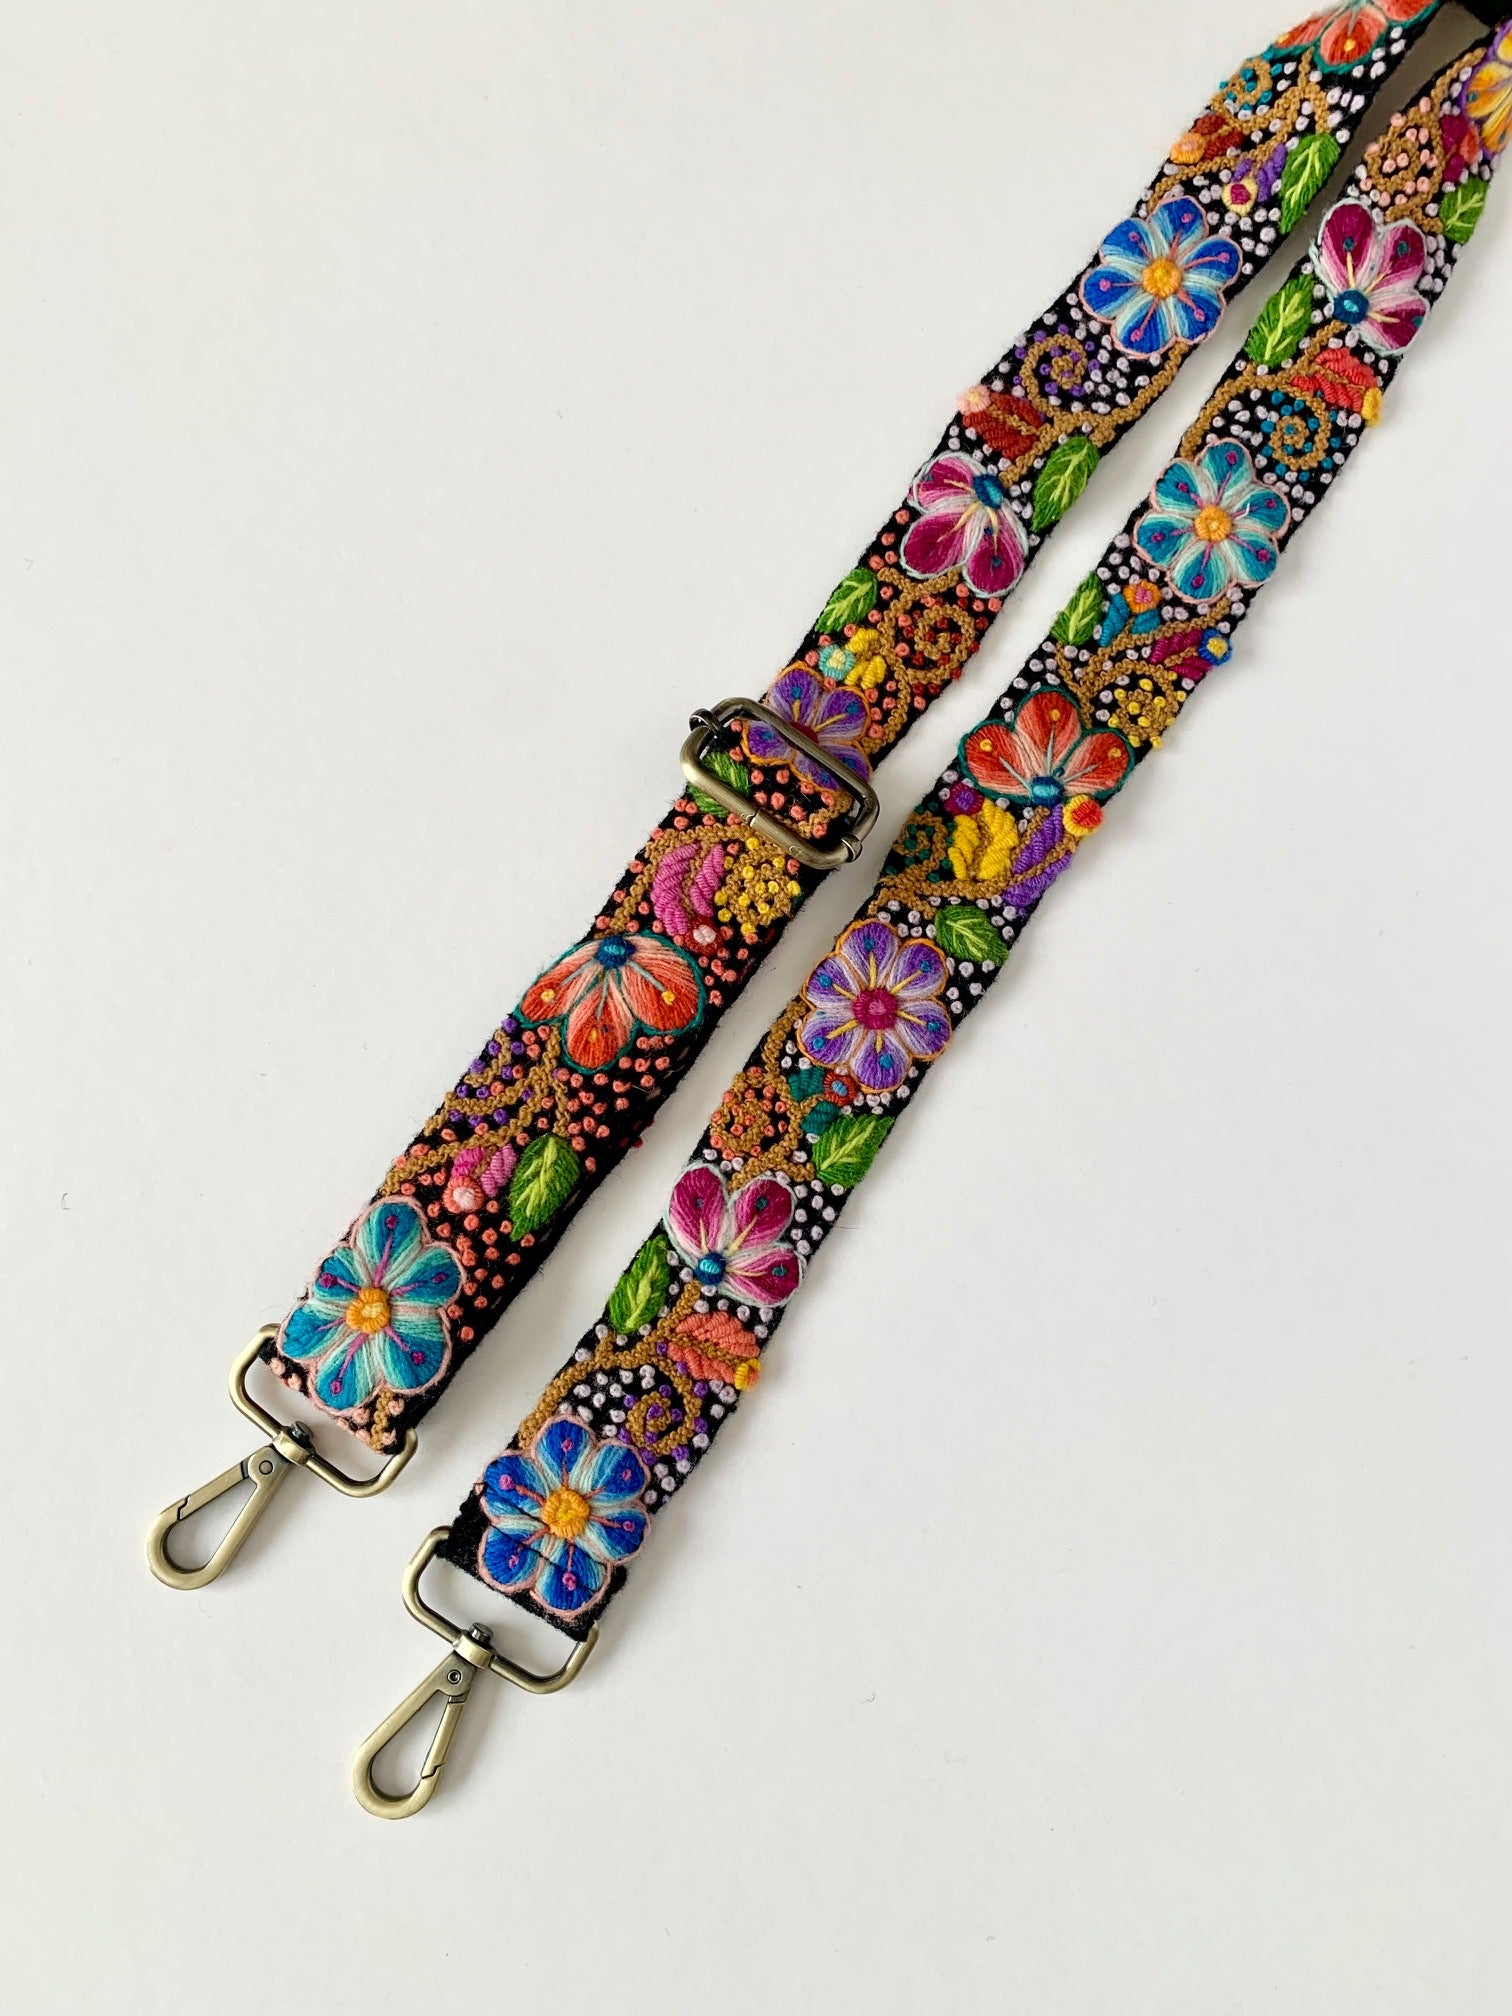 Black Floral Strap with colorful hand embroidery, close-ups of vibrant flowers on fabric straps.